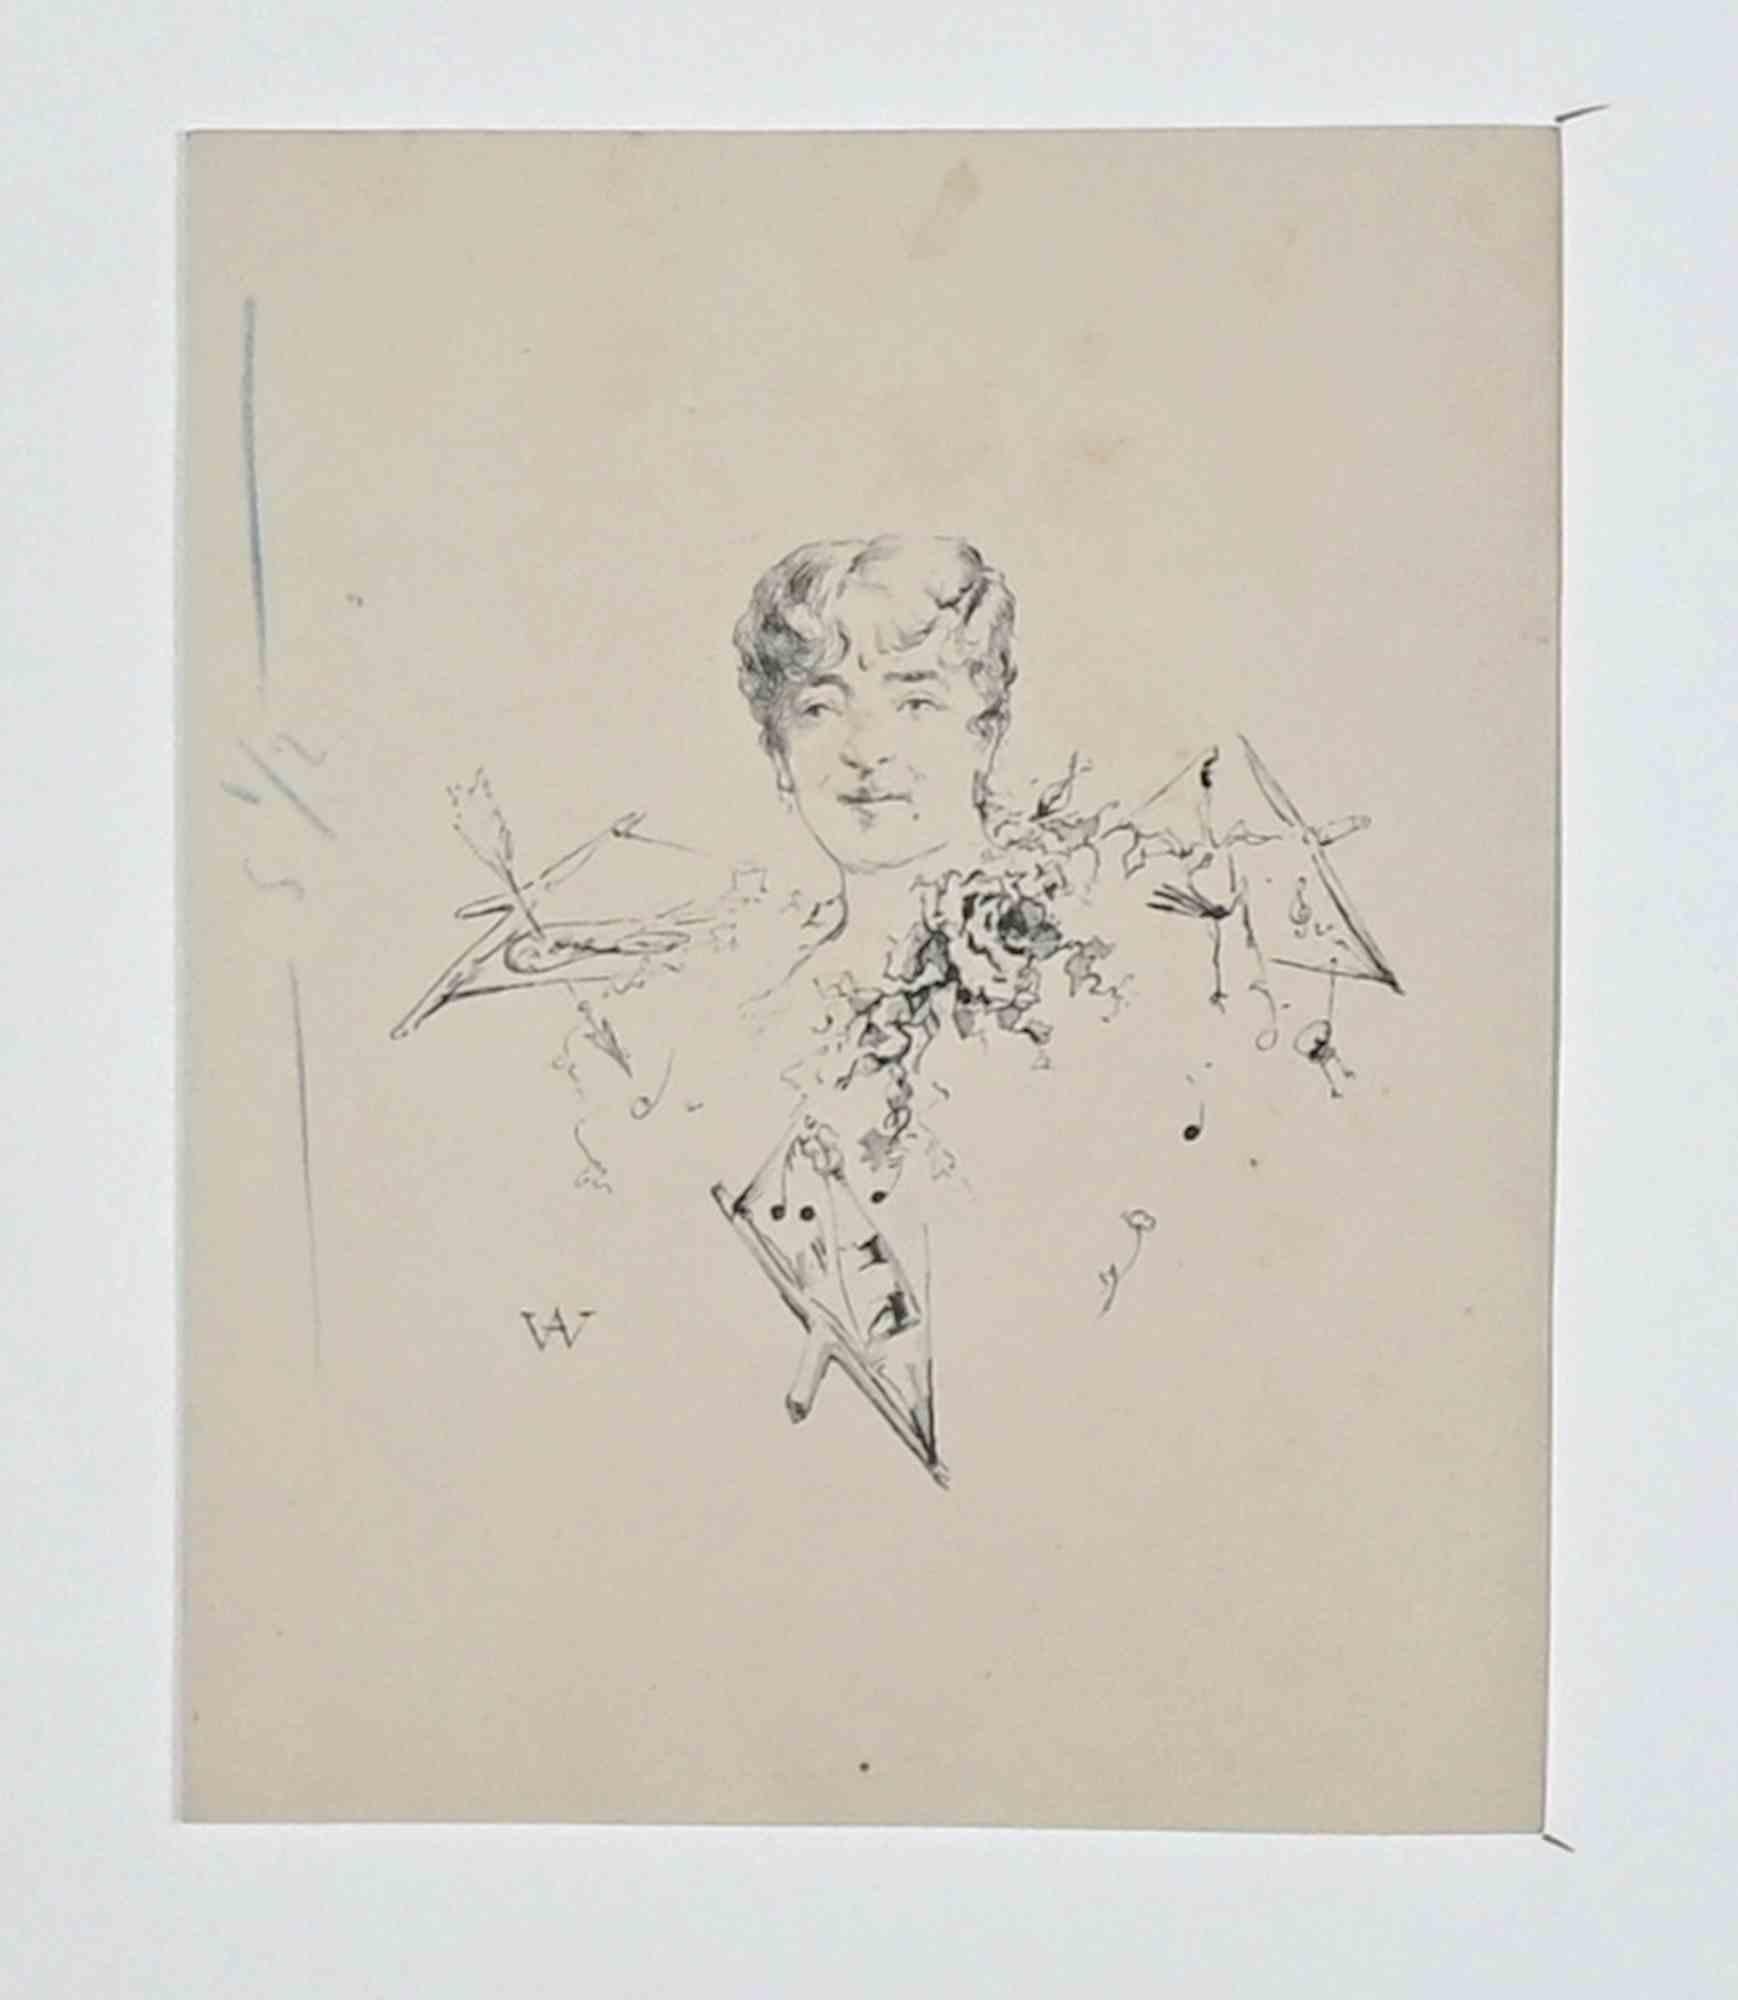 The Lady - Drawing by Adolphe Willette - Late-19th century 